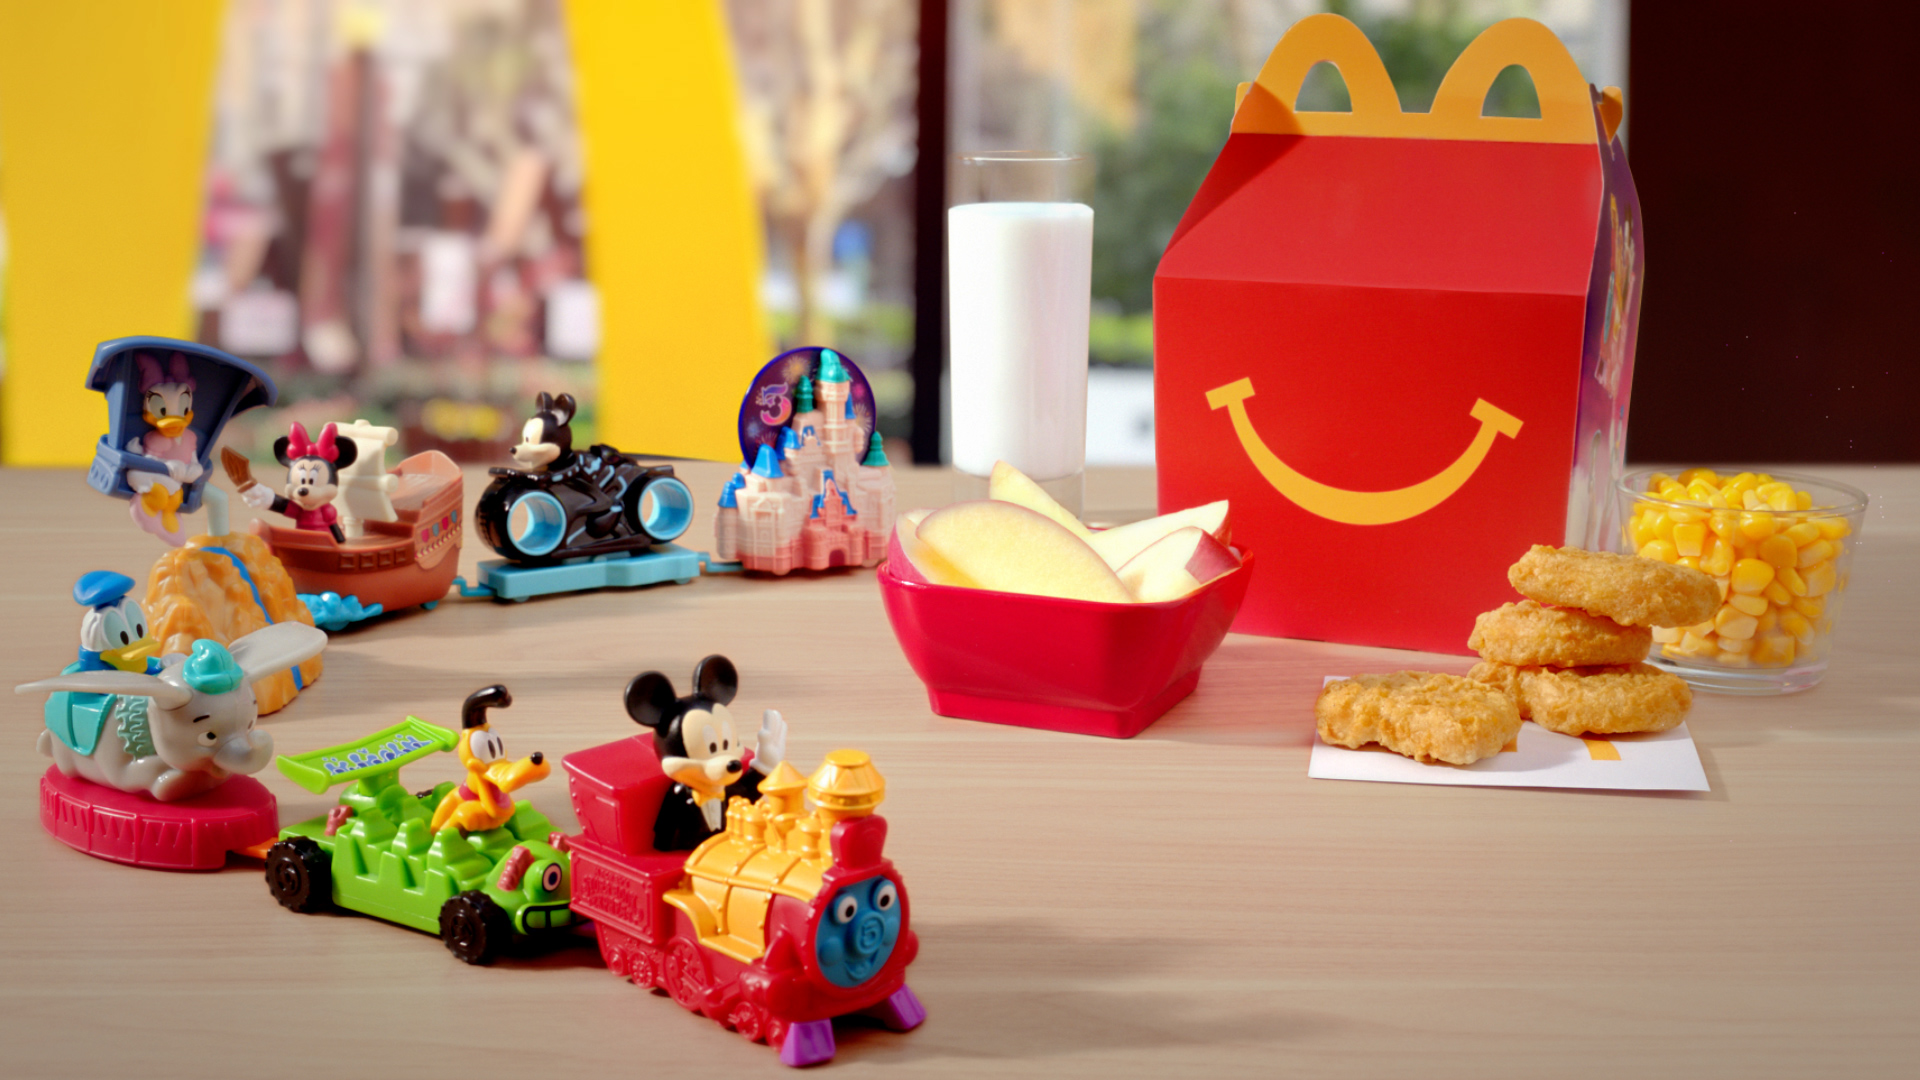 McDonald’s and Shanghai Disney Resort Team Up With Multi-Year Promotional Deal